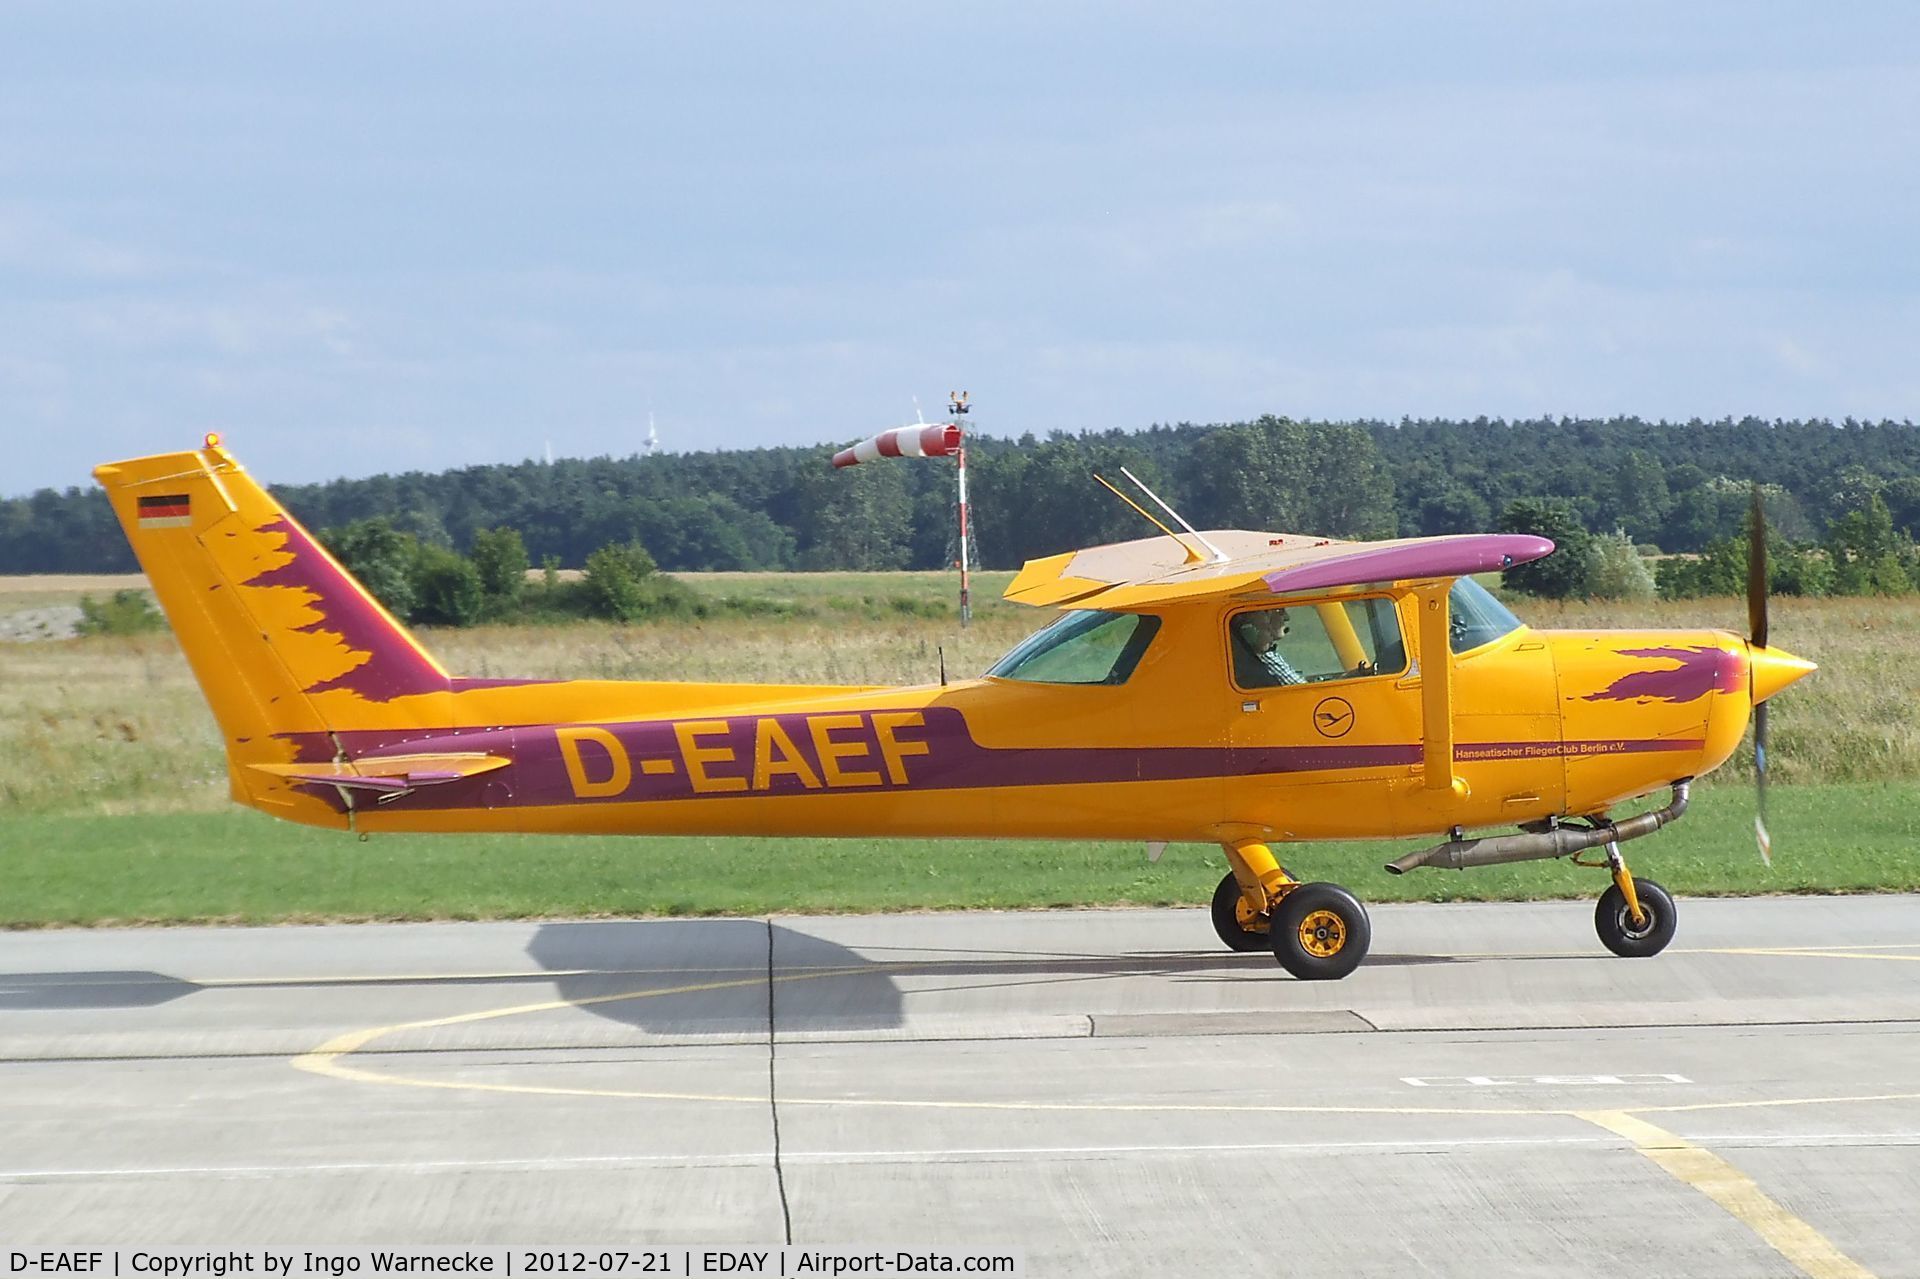 D-EAEF, Cessna 152 C/N 152-85296, Cessna 152 at Strausberg airfield